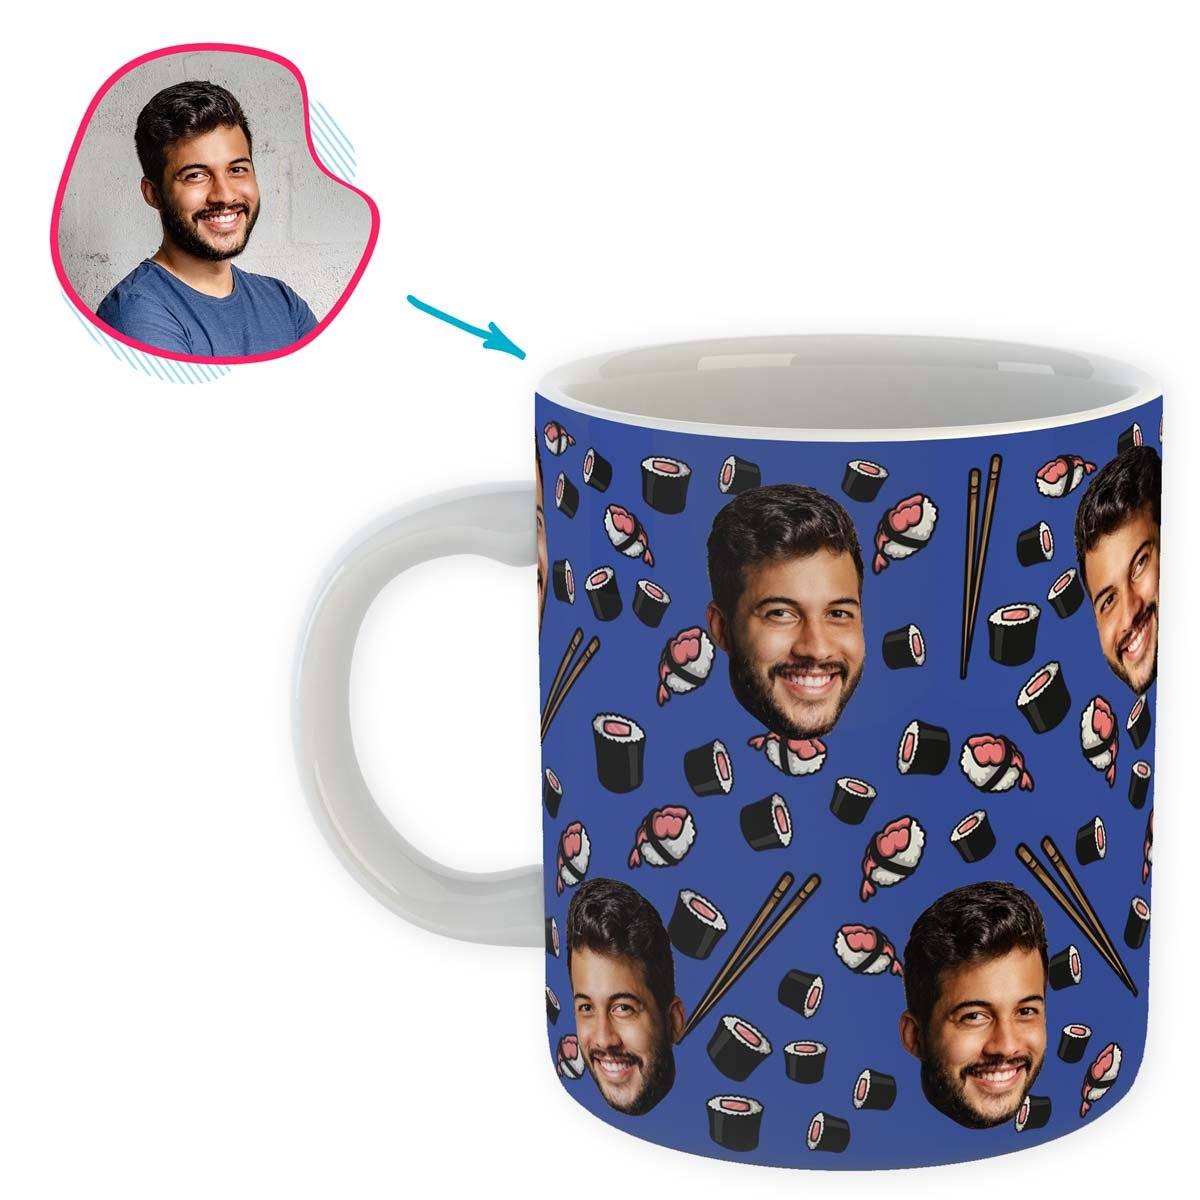 darkblue Sushi mug personalized with photo of face printed on it